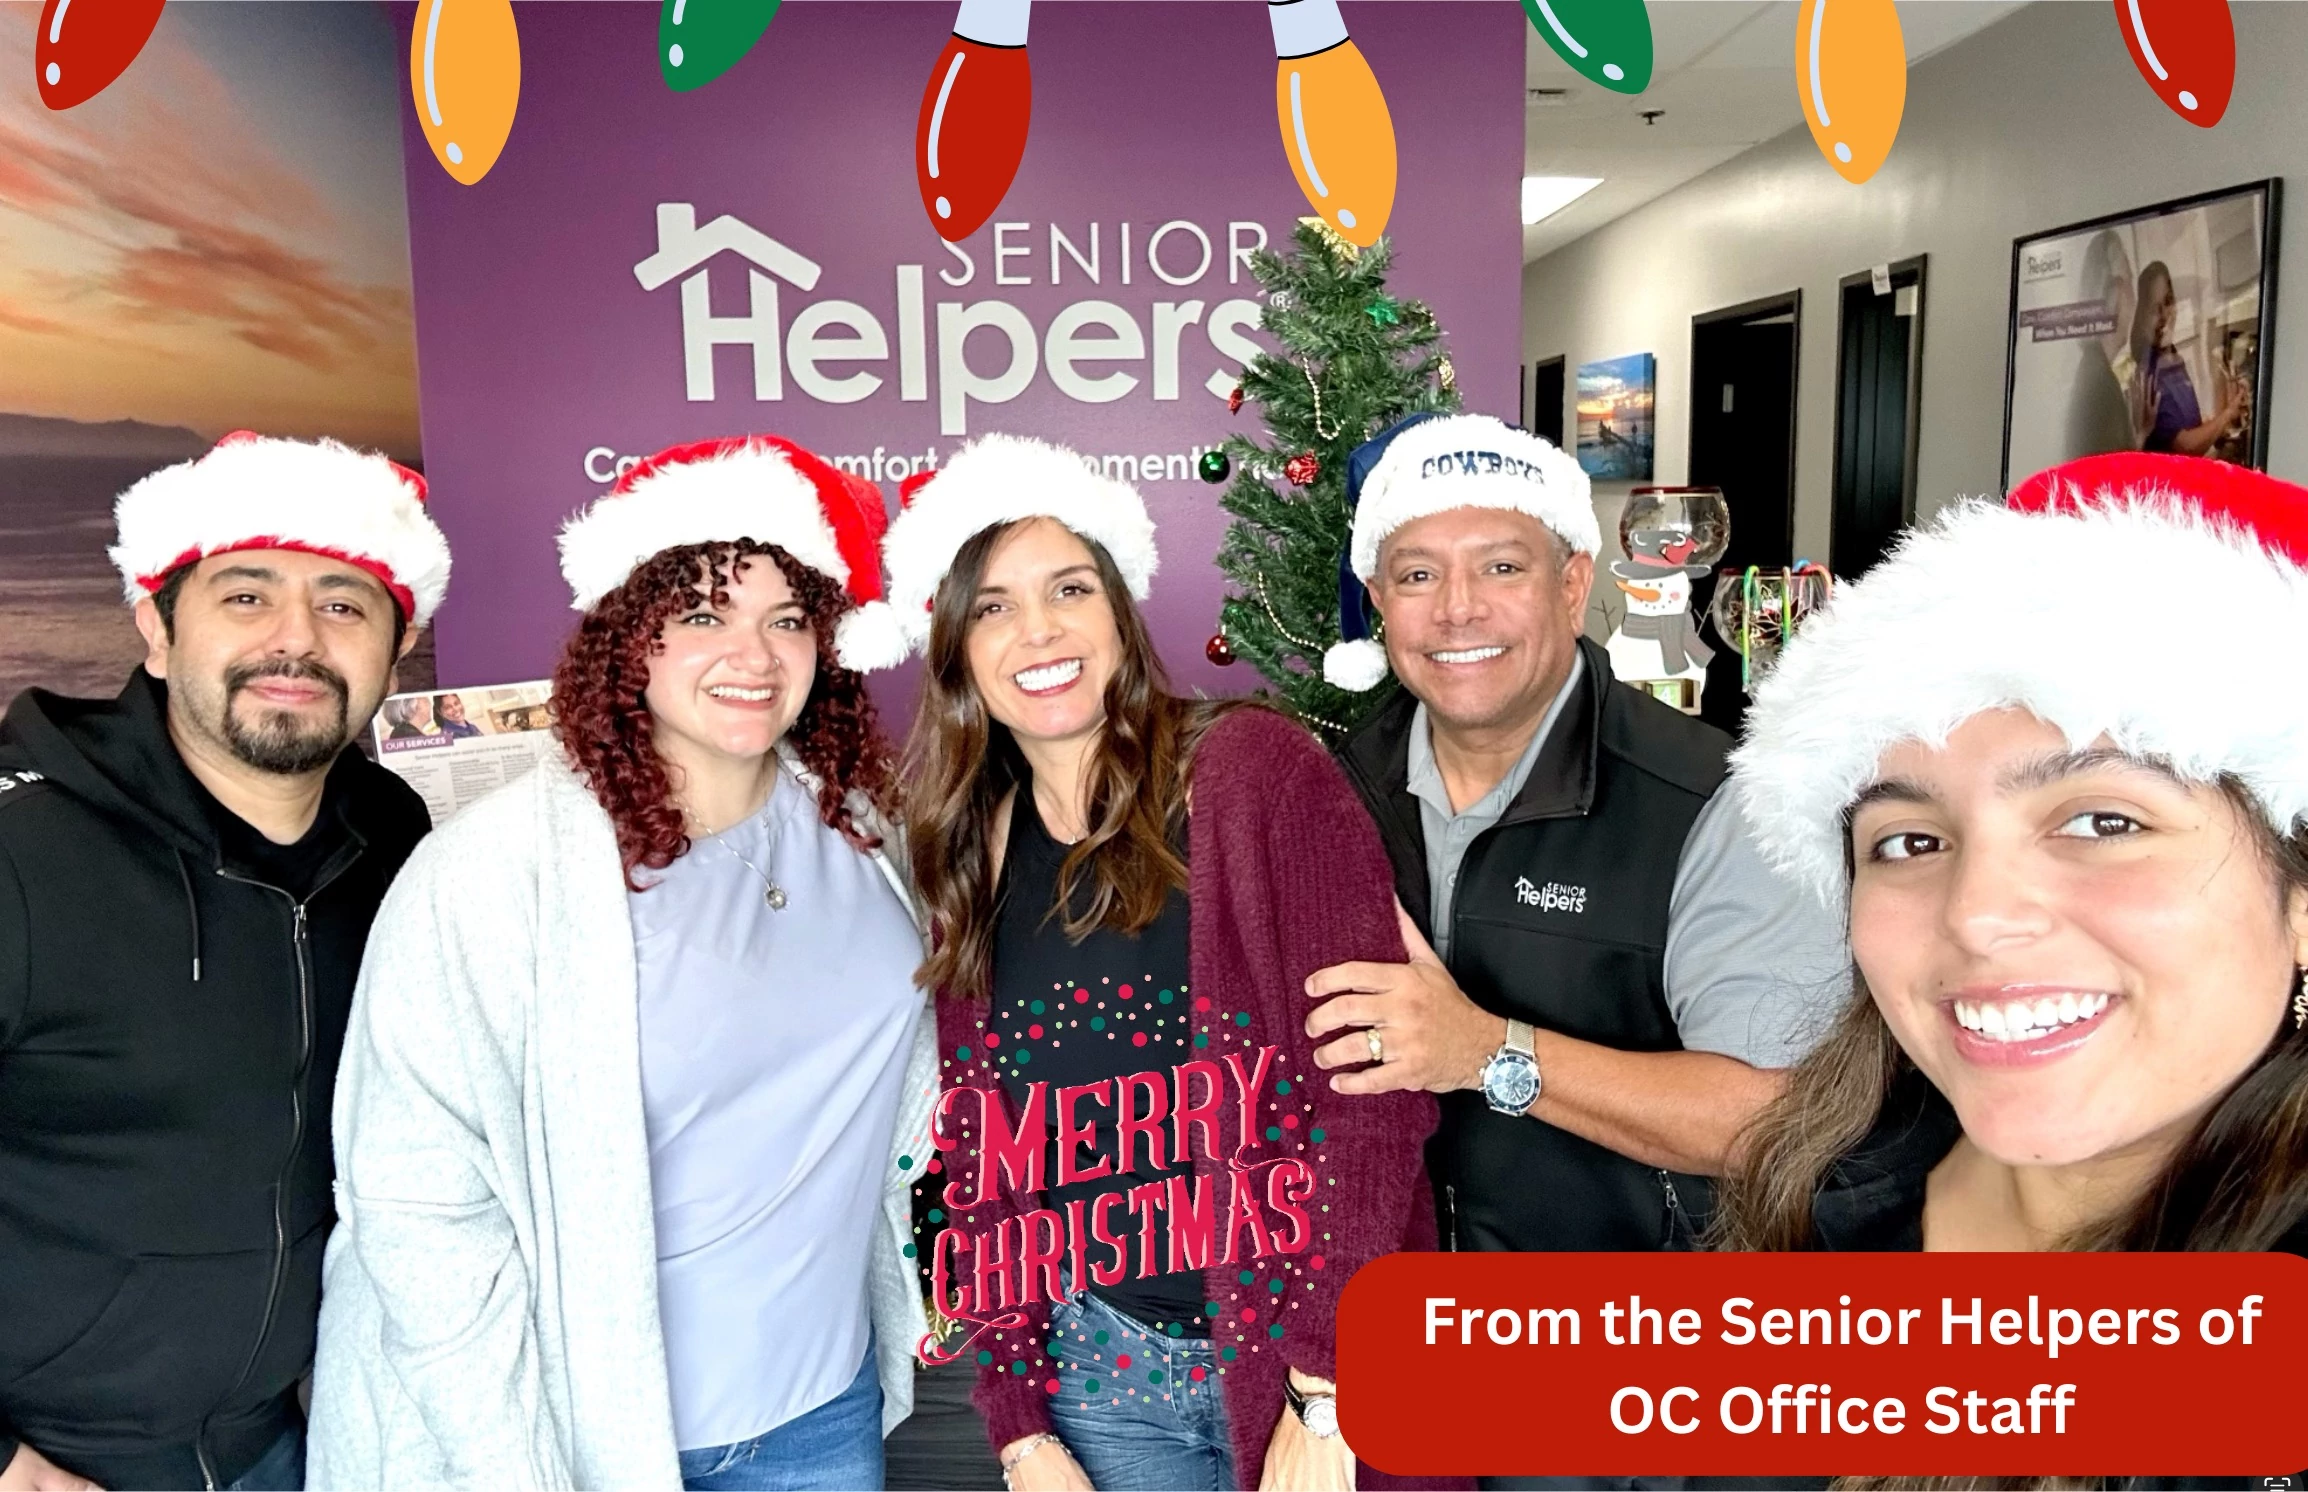 Merry Christmas & Happy Holidays from your family at Senior Helpers of South Orange County! Enjoy the time with family, friends, and the older adults in your life. 🎅🎄